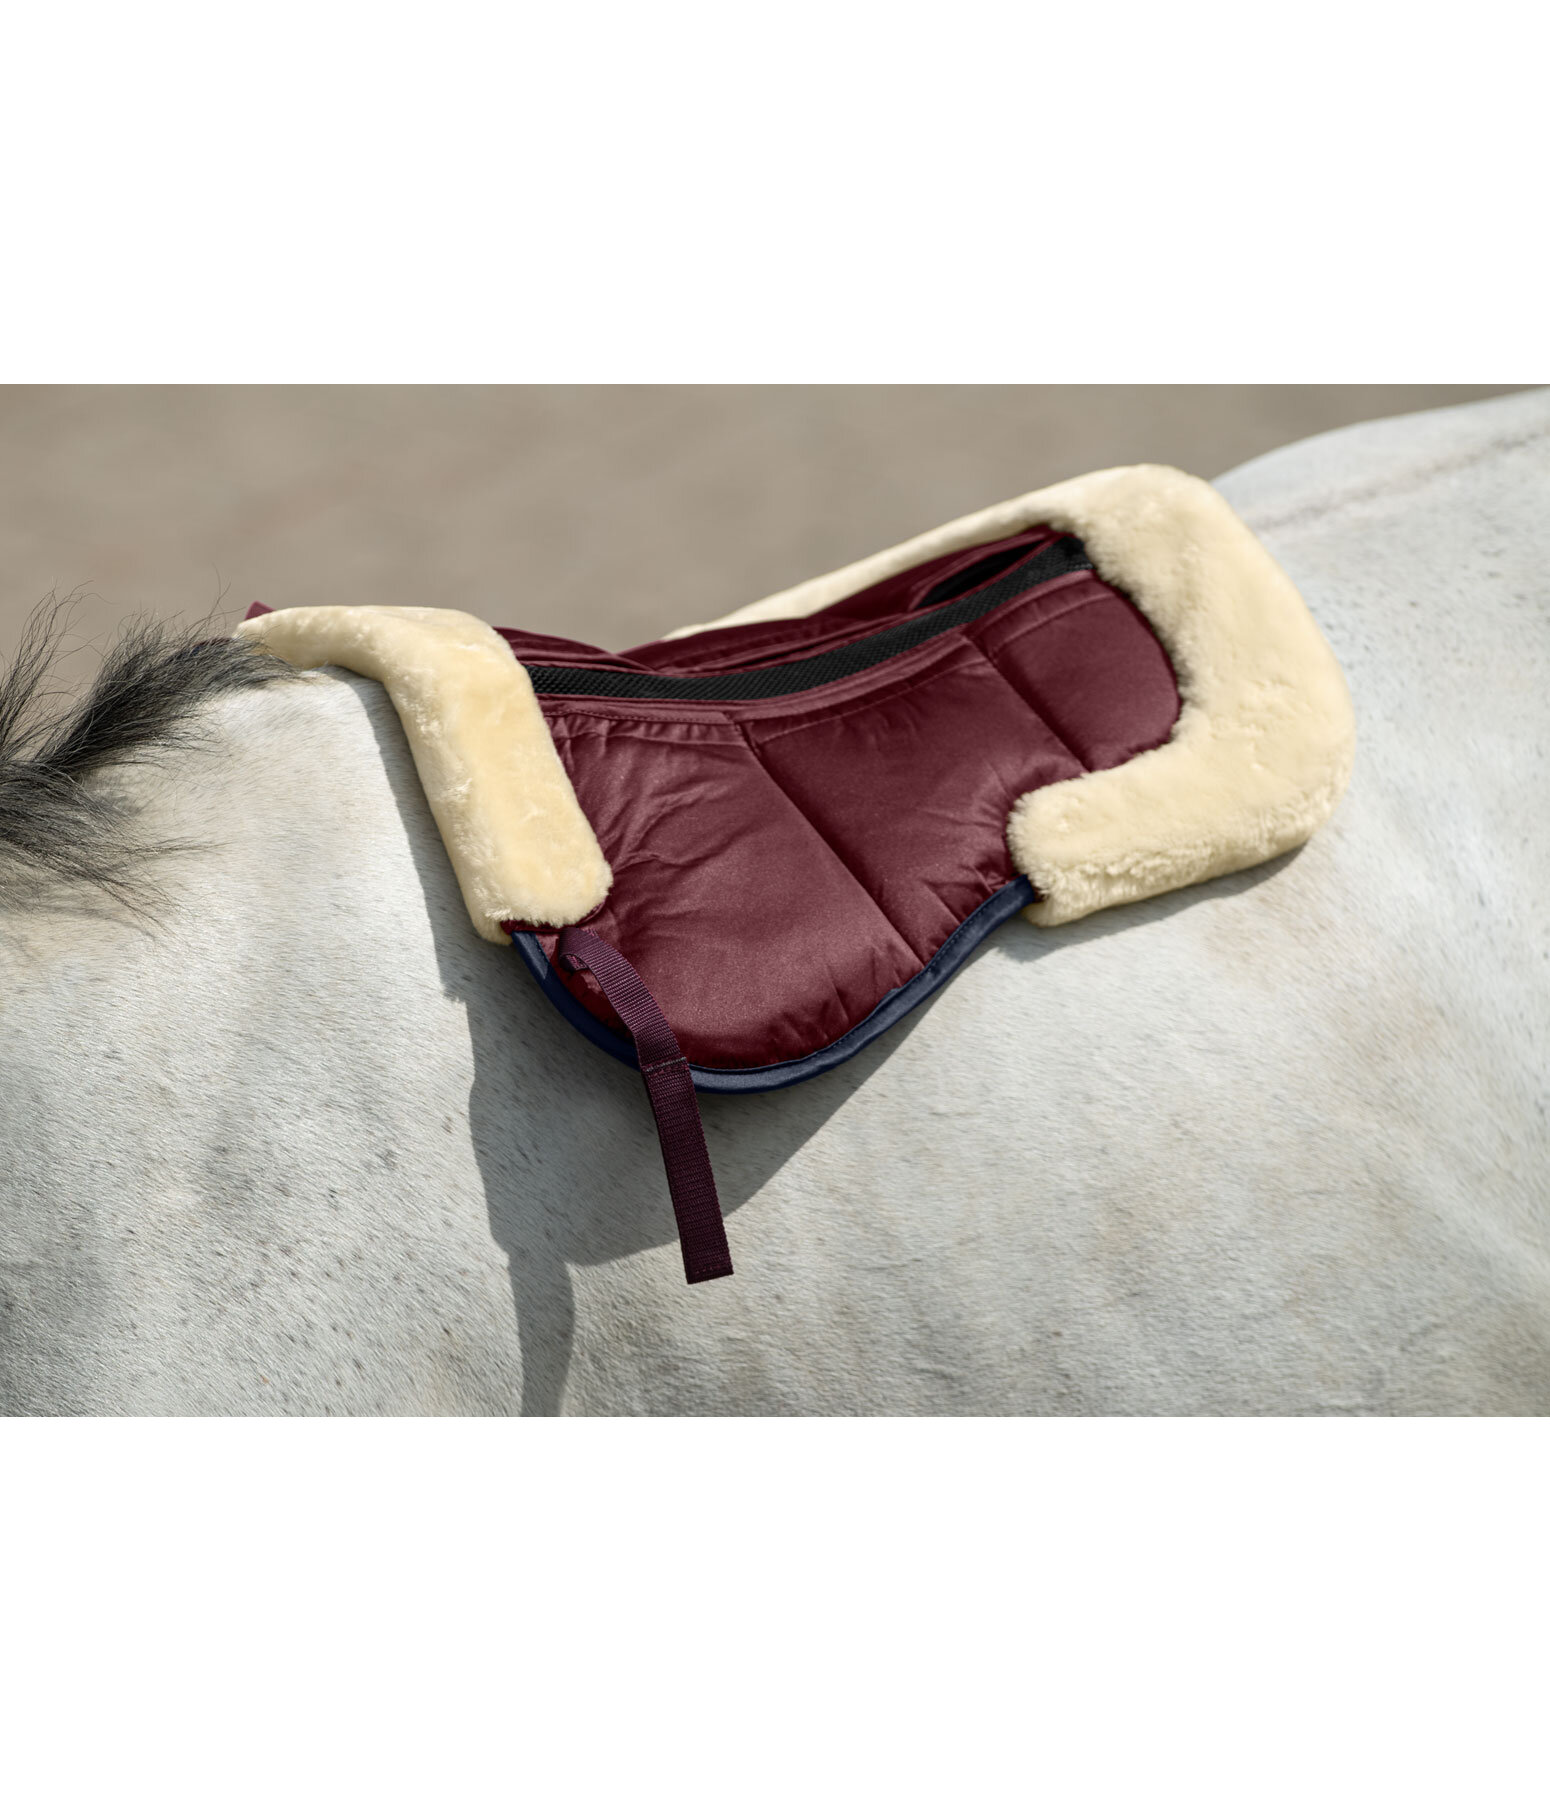 Saddle Pad Swiss Design with insert pockets for correction pads